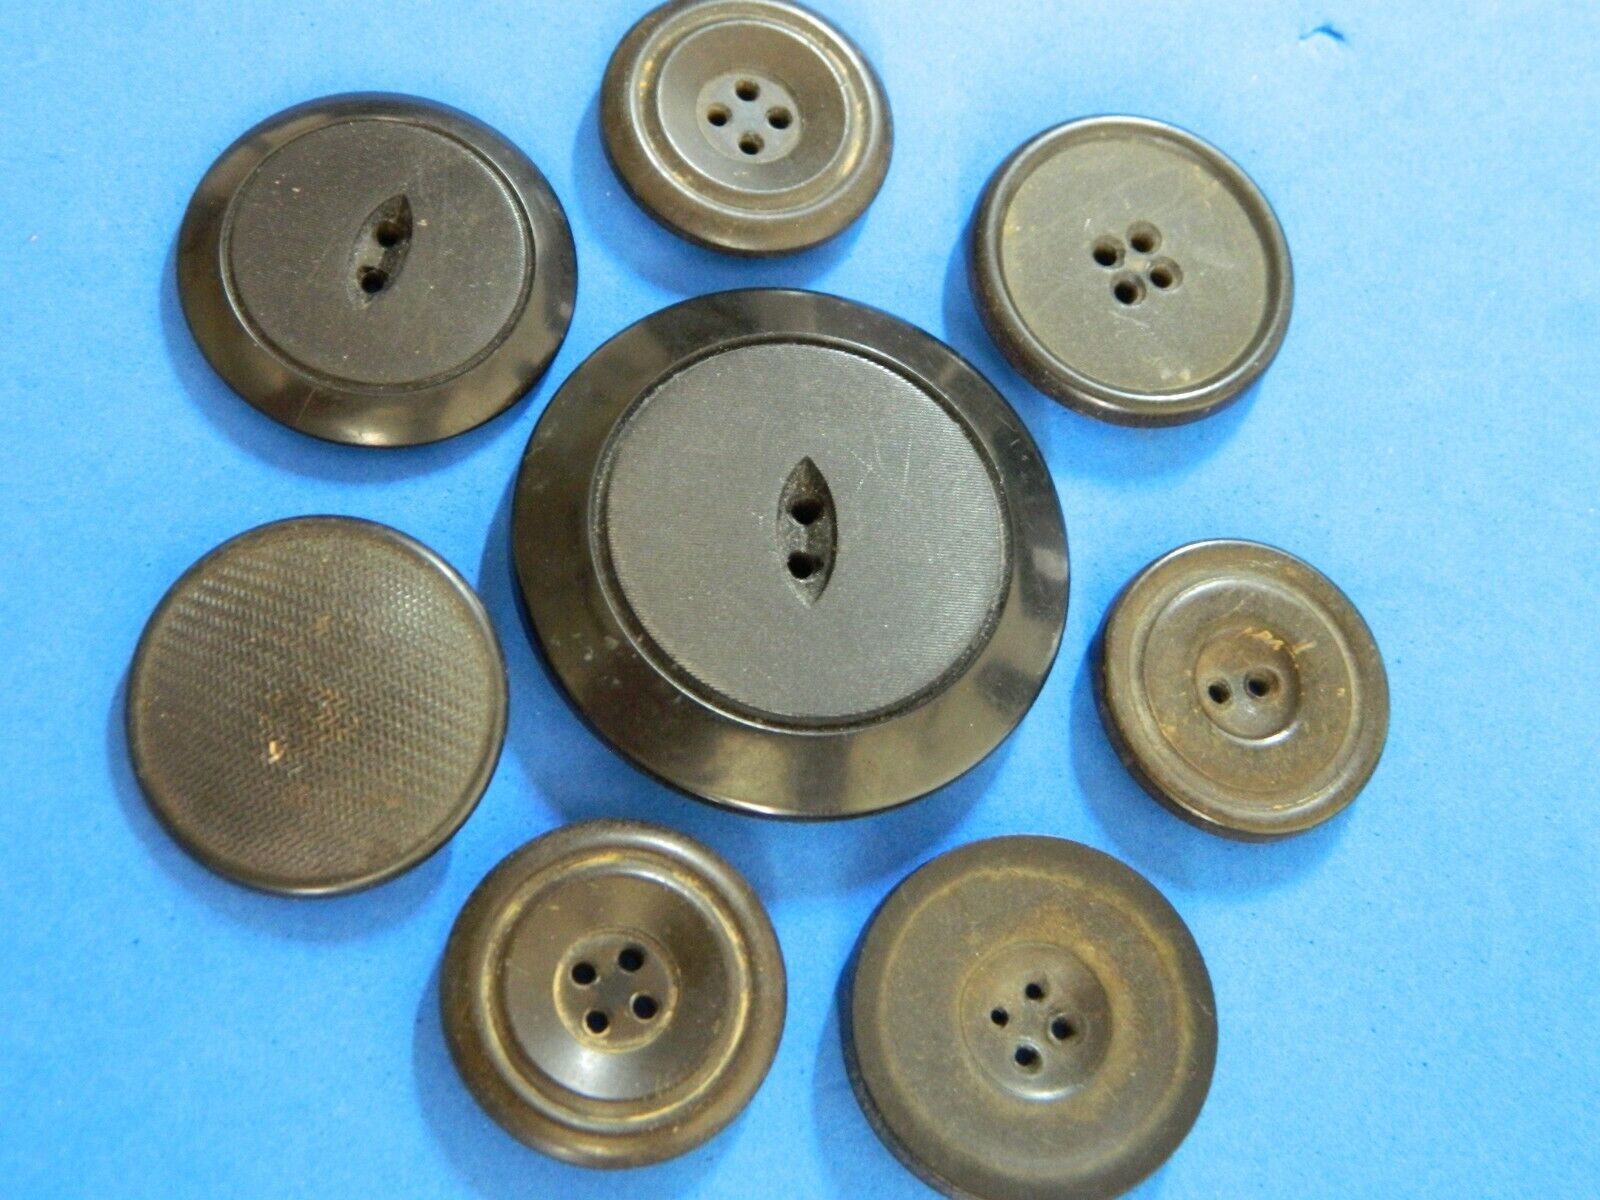  LOT of 8 Antique GOODYEAR'S Buttons Backmarked Без бренда